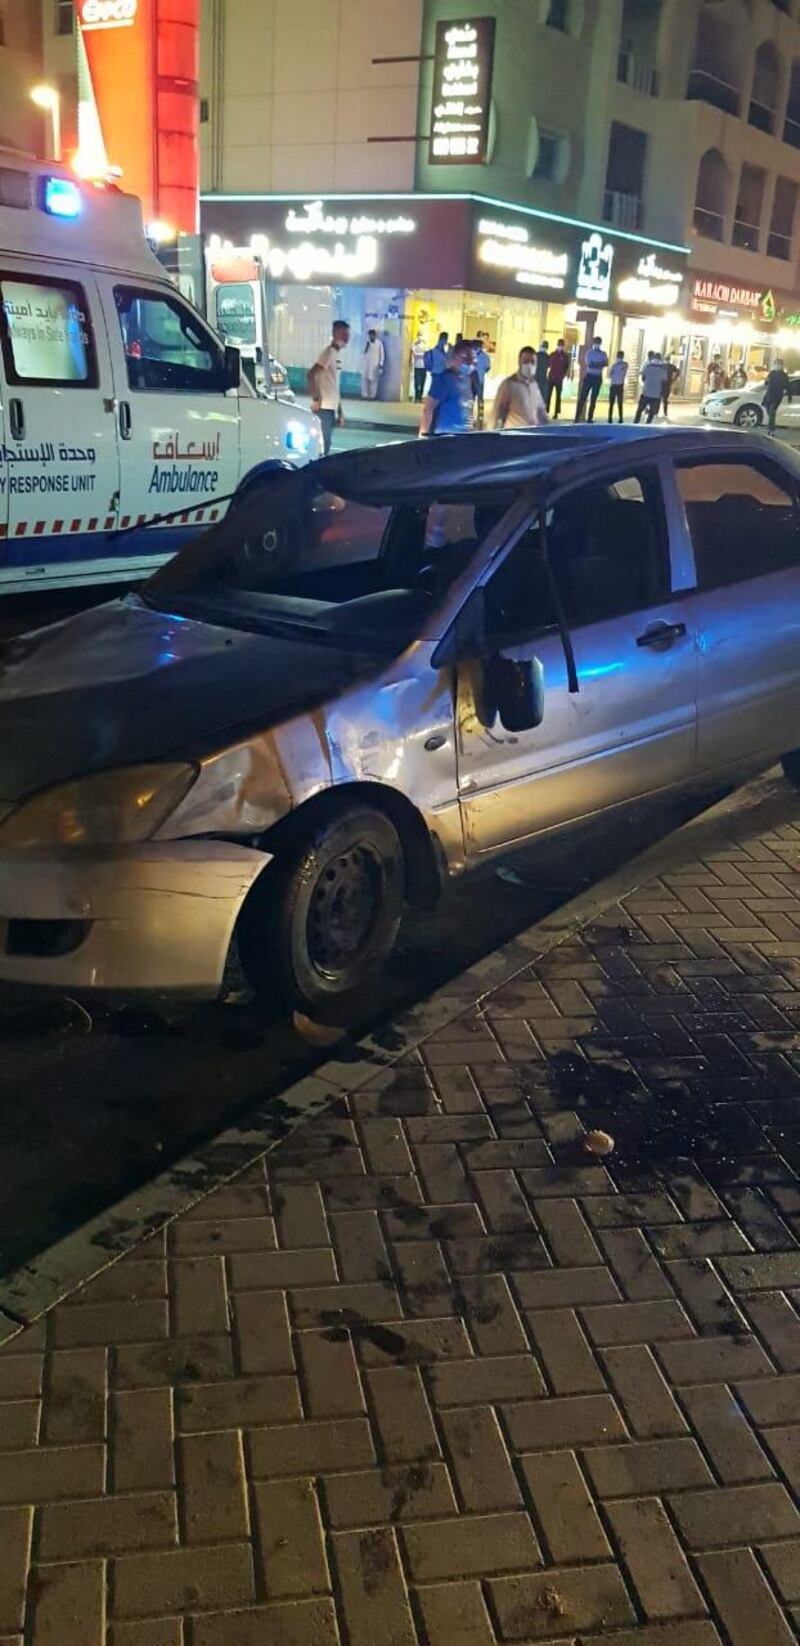 A pedestrian was taken to hospital with serious injuries in a car crash on Wednesday. Courtesy: Dubai Police